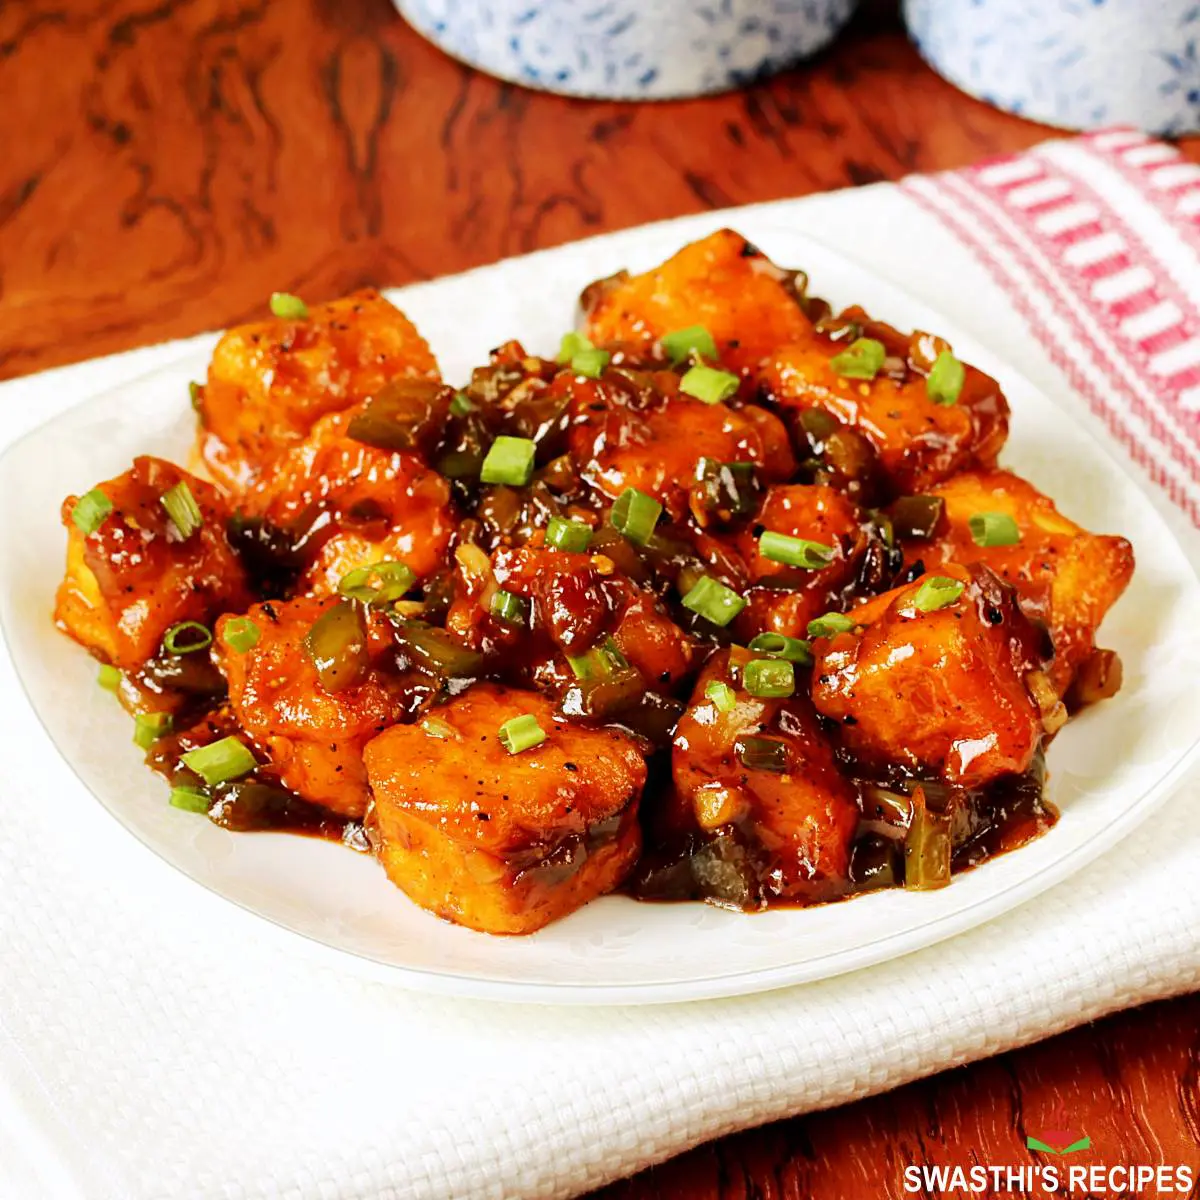 paneer manchurian recipe made with paneer, soya sauce and chilli sauce